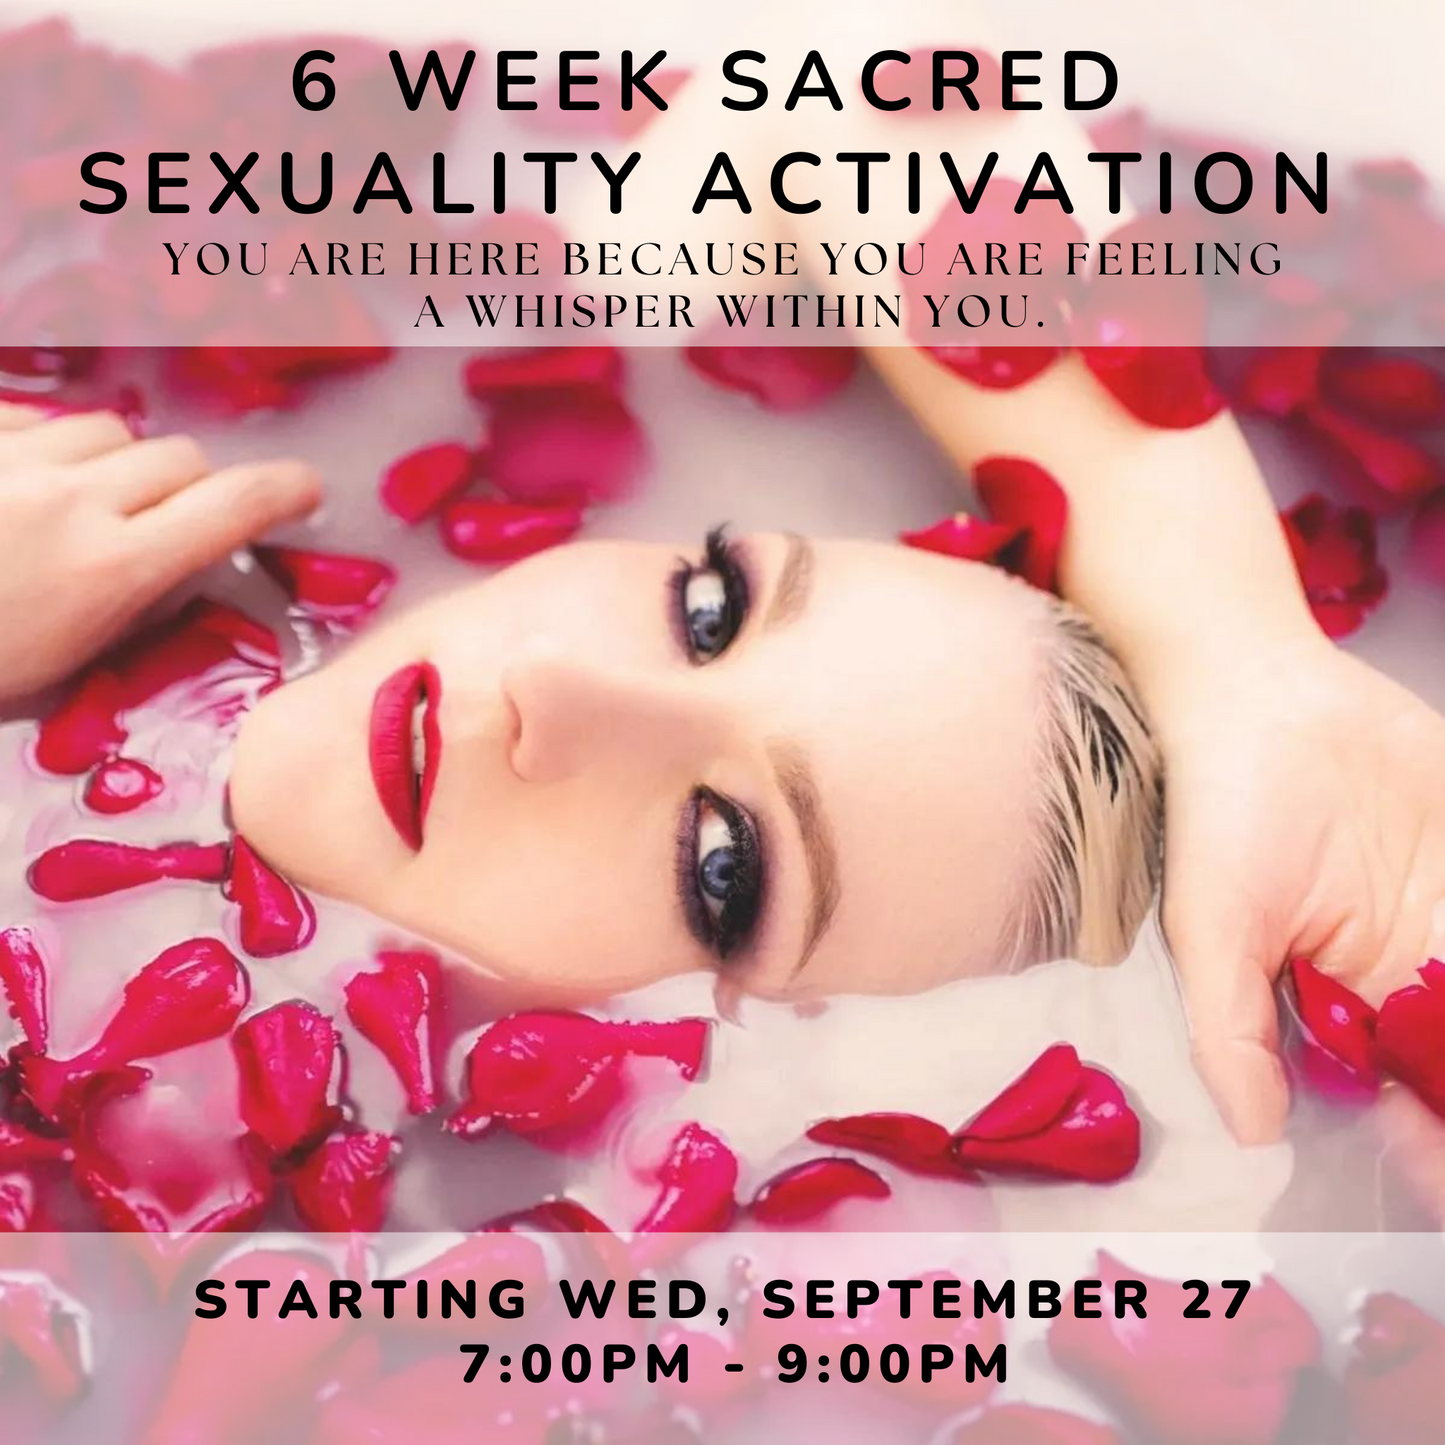 6 week Sacred Sexuality Activation Group:Starting Wed, September 27